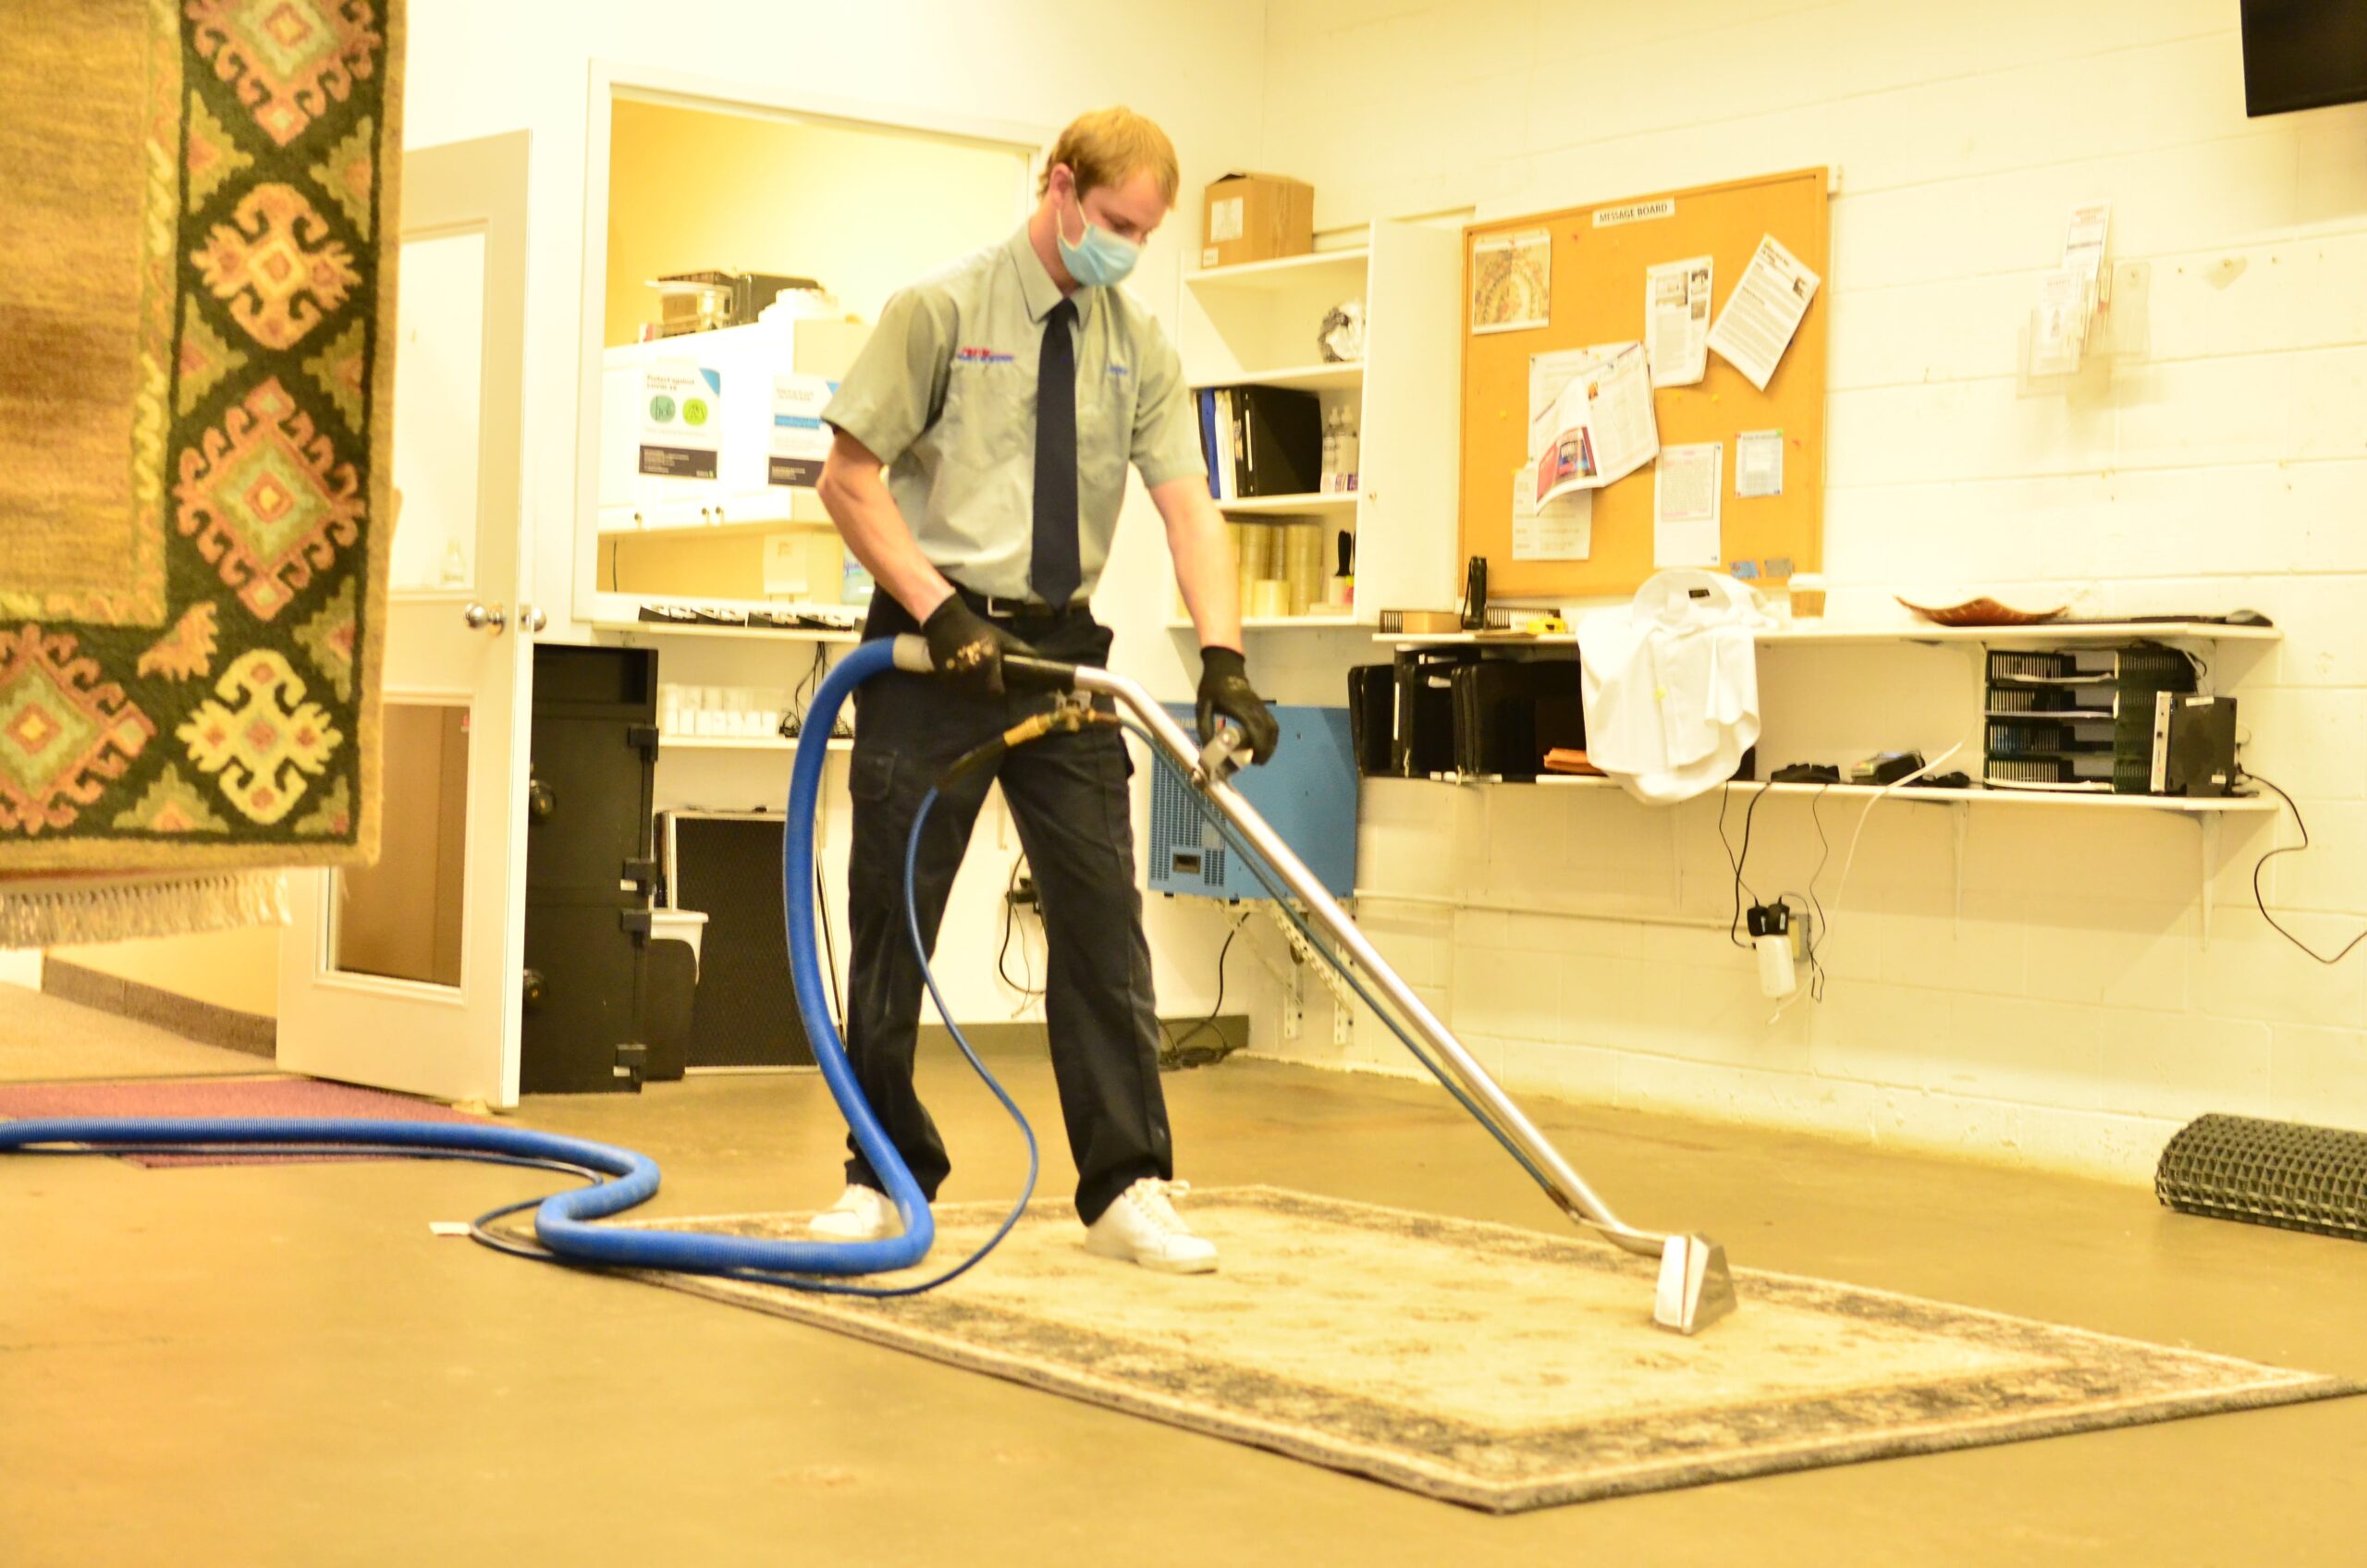 carpets and area rugs to keep them in optimal condition."